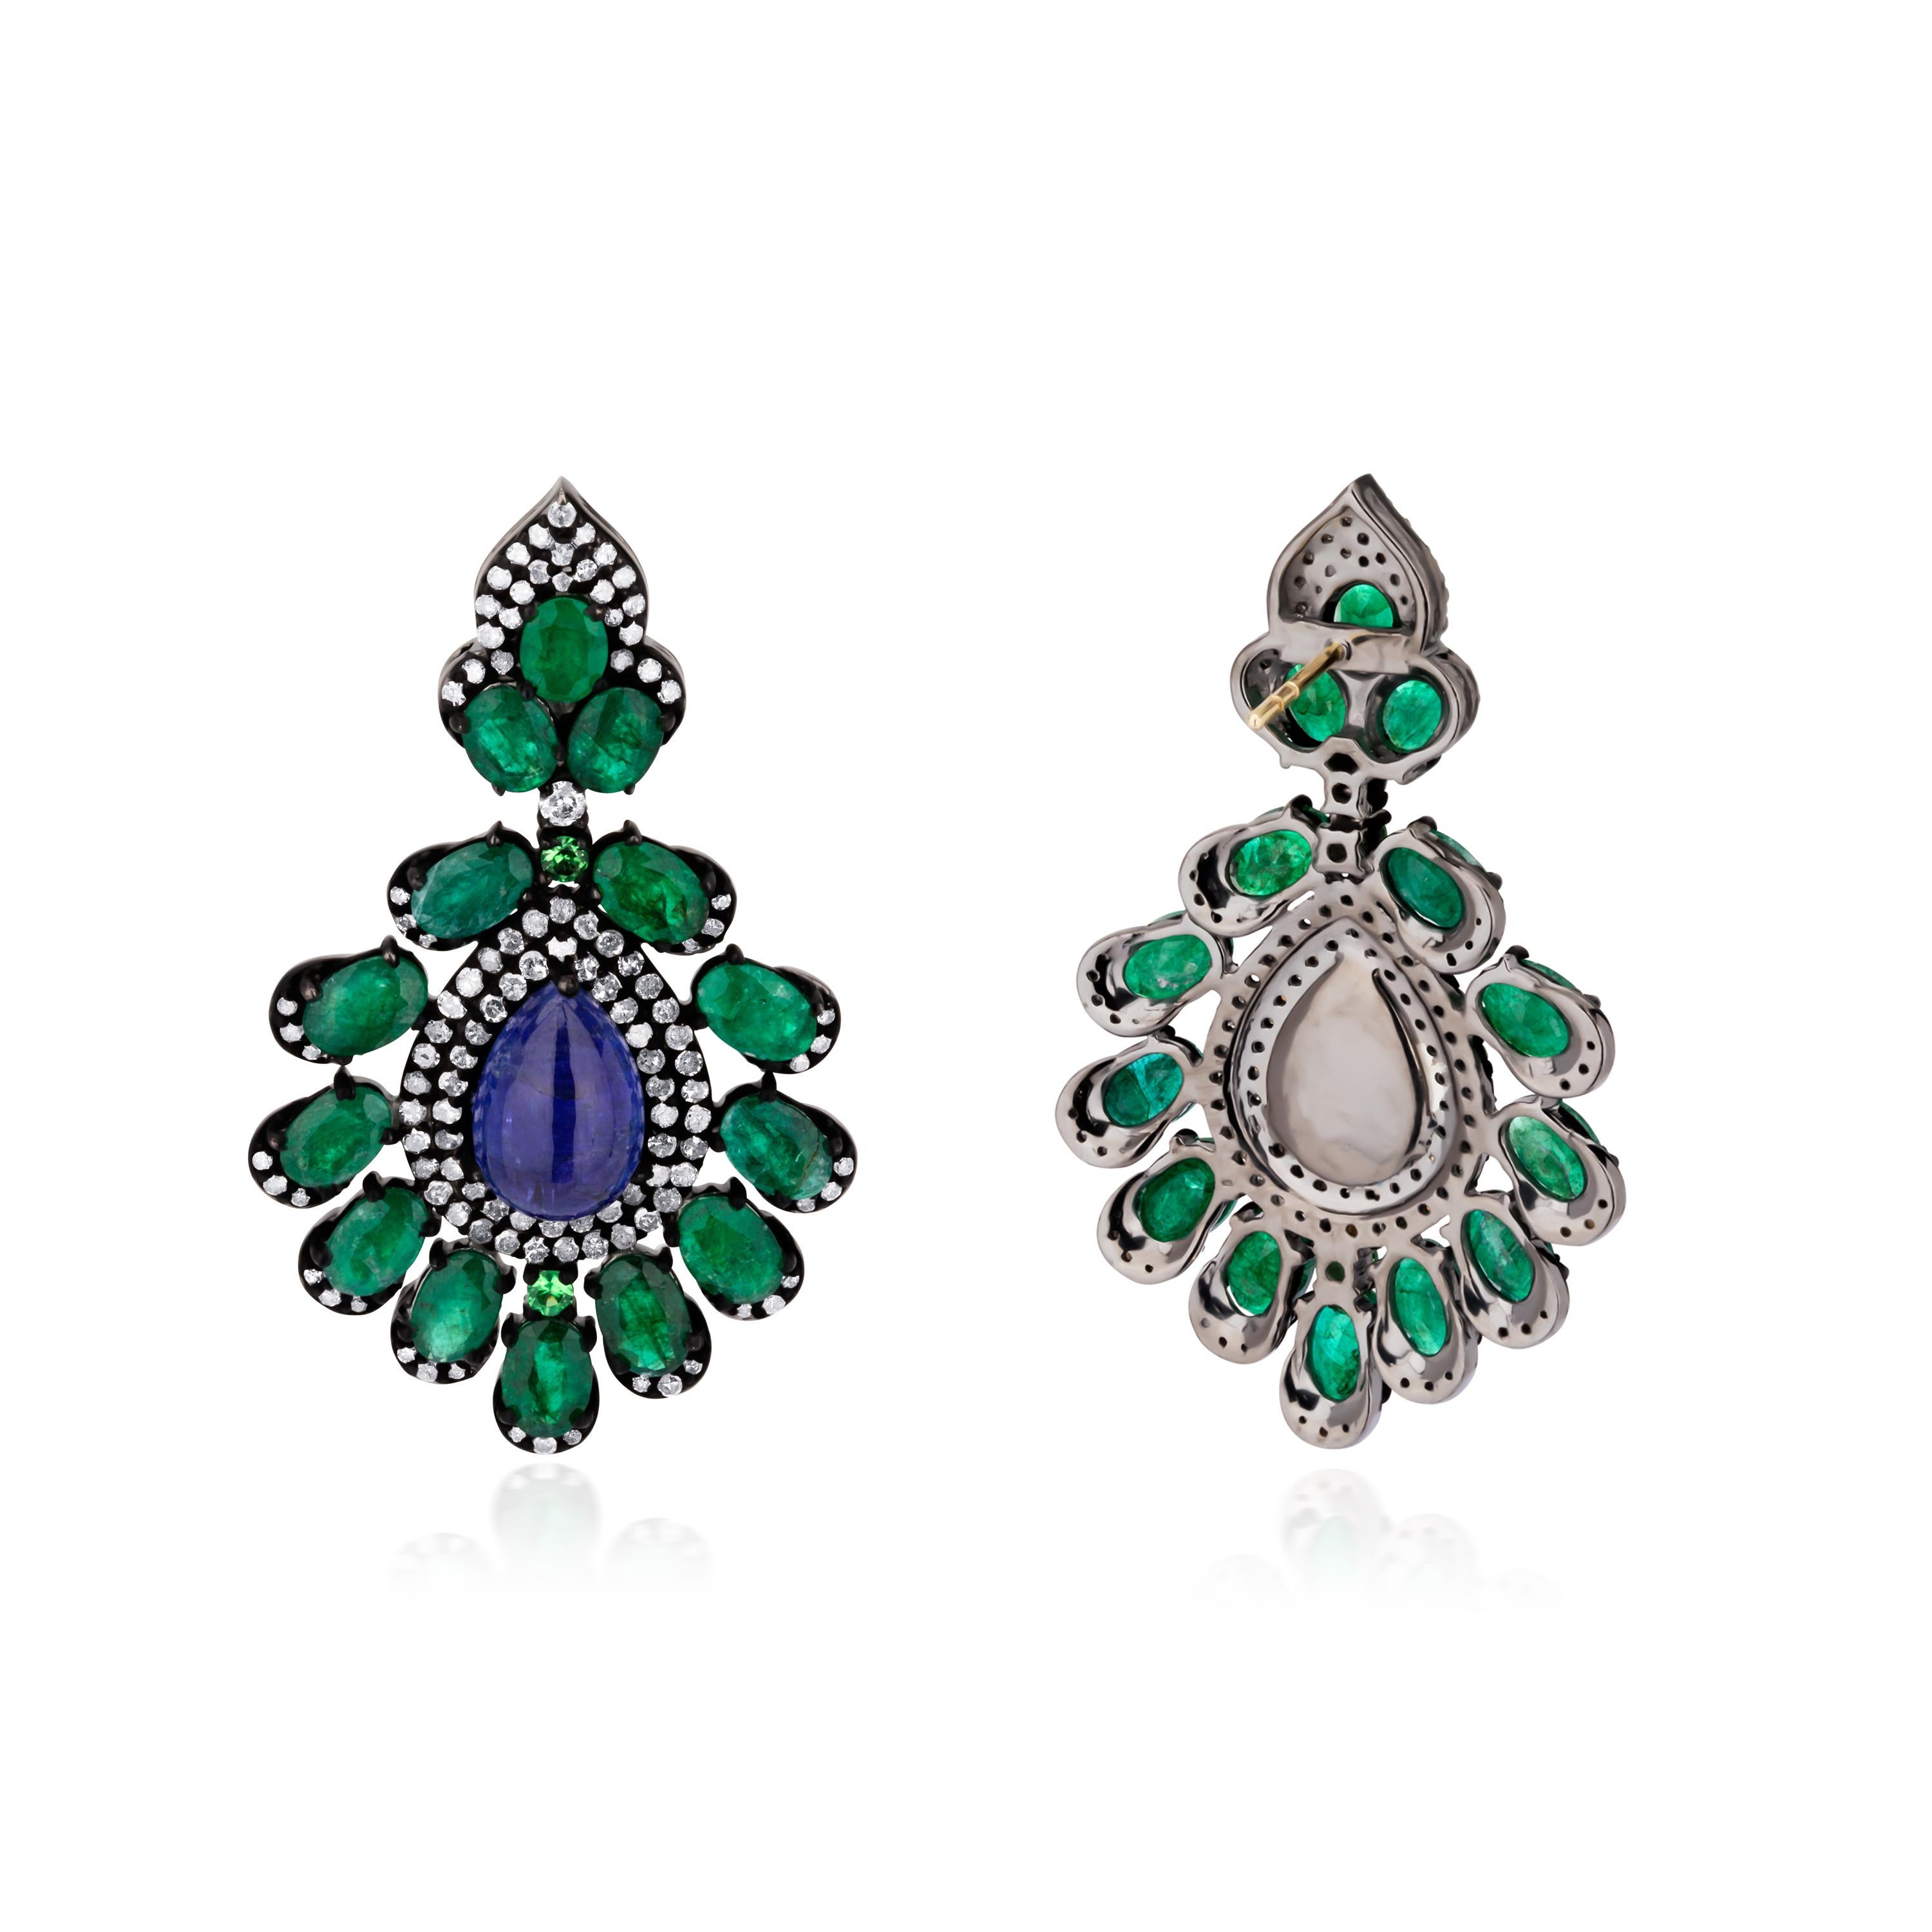 Fun and flirty, these Victorian drop earrings glow at their centers with pear cut tanzanites that are framed inside exquisitely designed frames of faceted emeralds and diamonds. Rendered in 18K gold and 925 sterling silver these stunning earrings